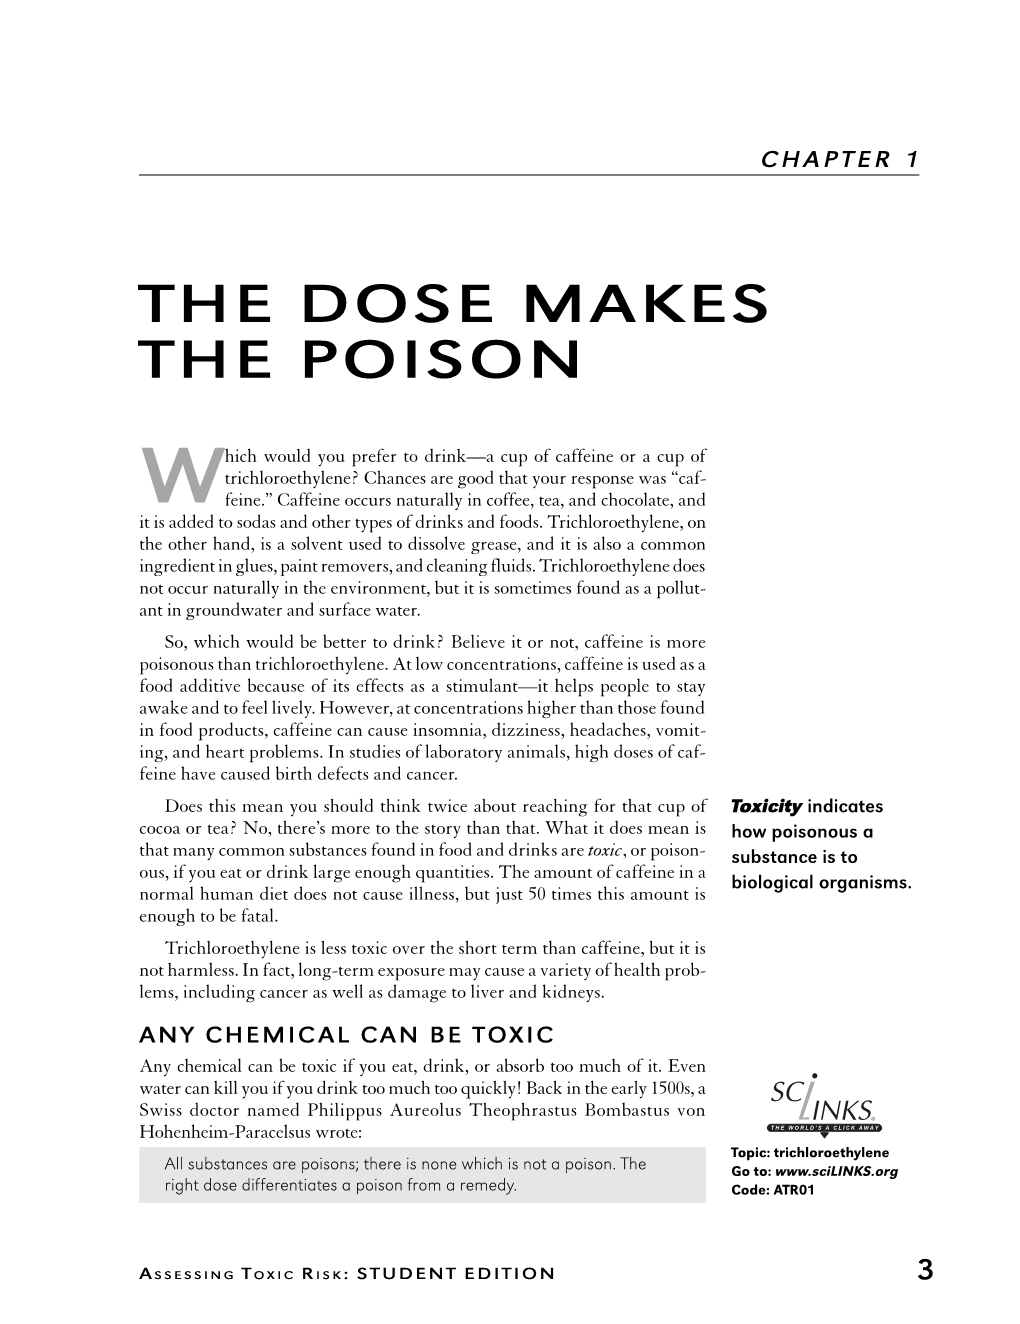 The Dose Makes the Poison